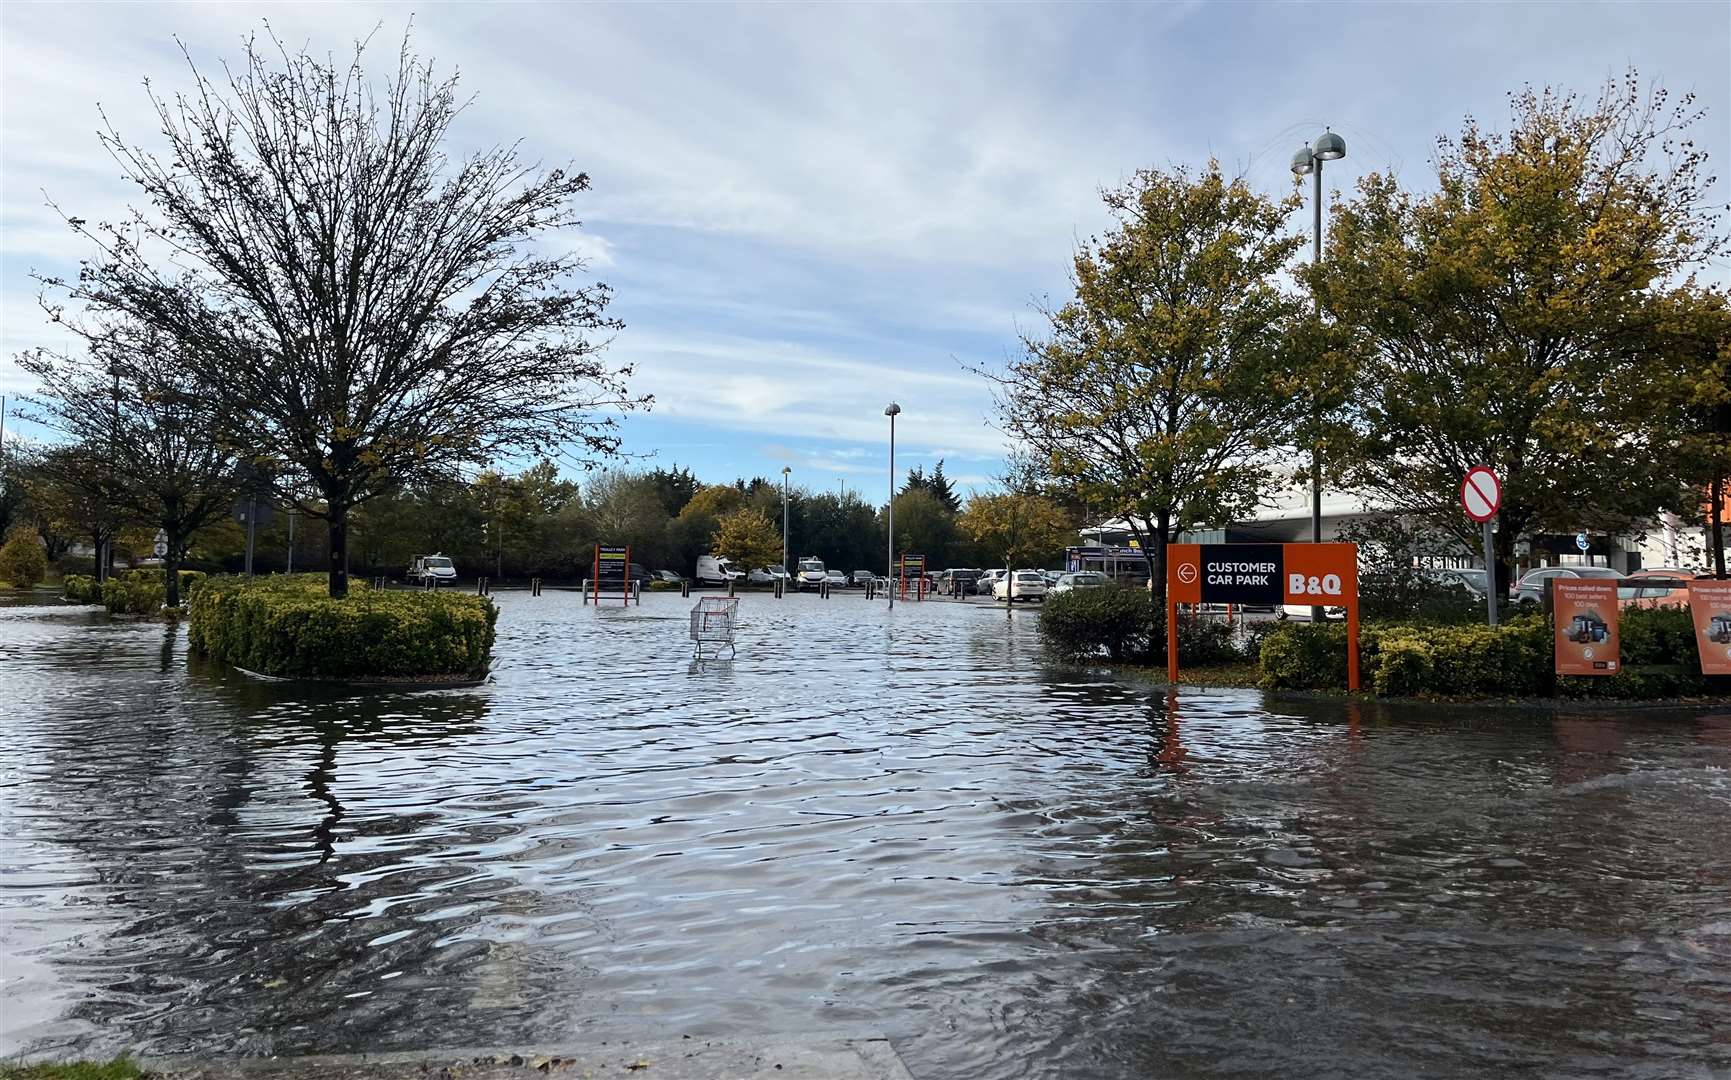 The car park at Ashford's B&Q, which sits opposite Gallagher Retail Park, was flooded last week